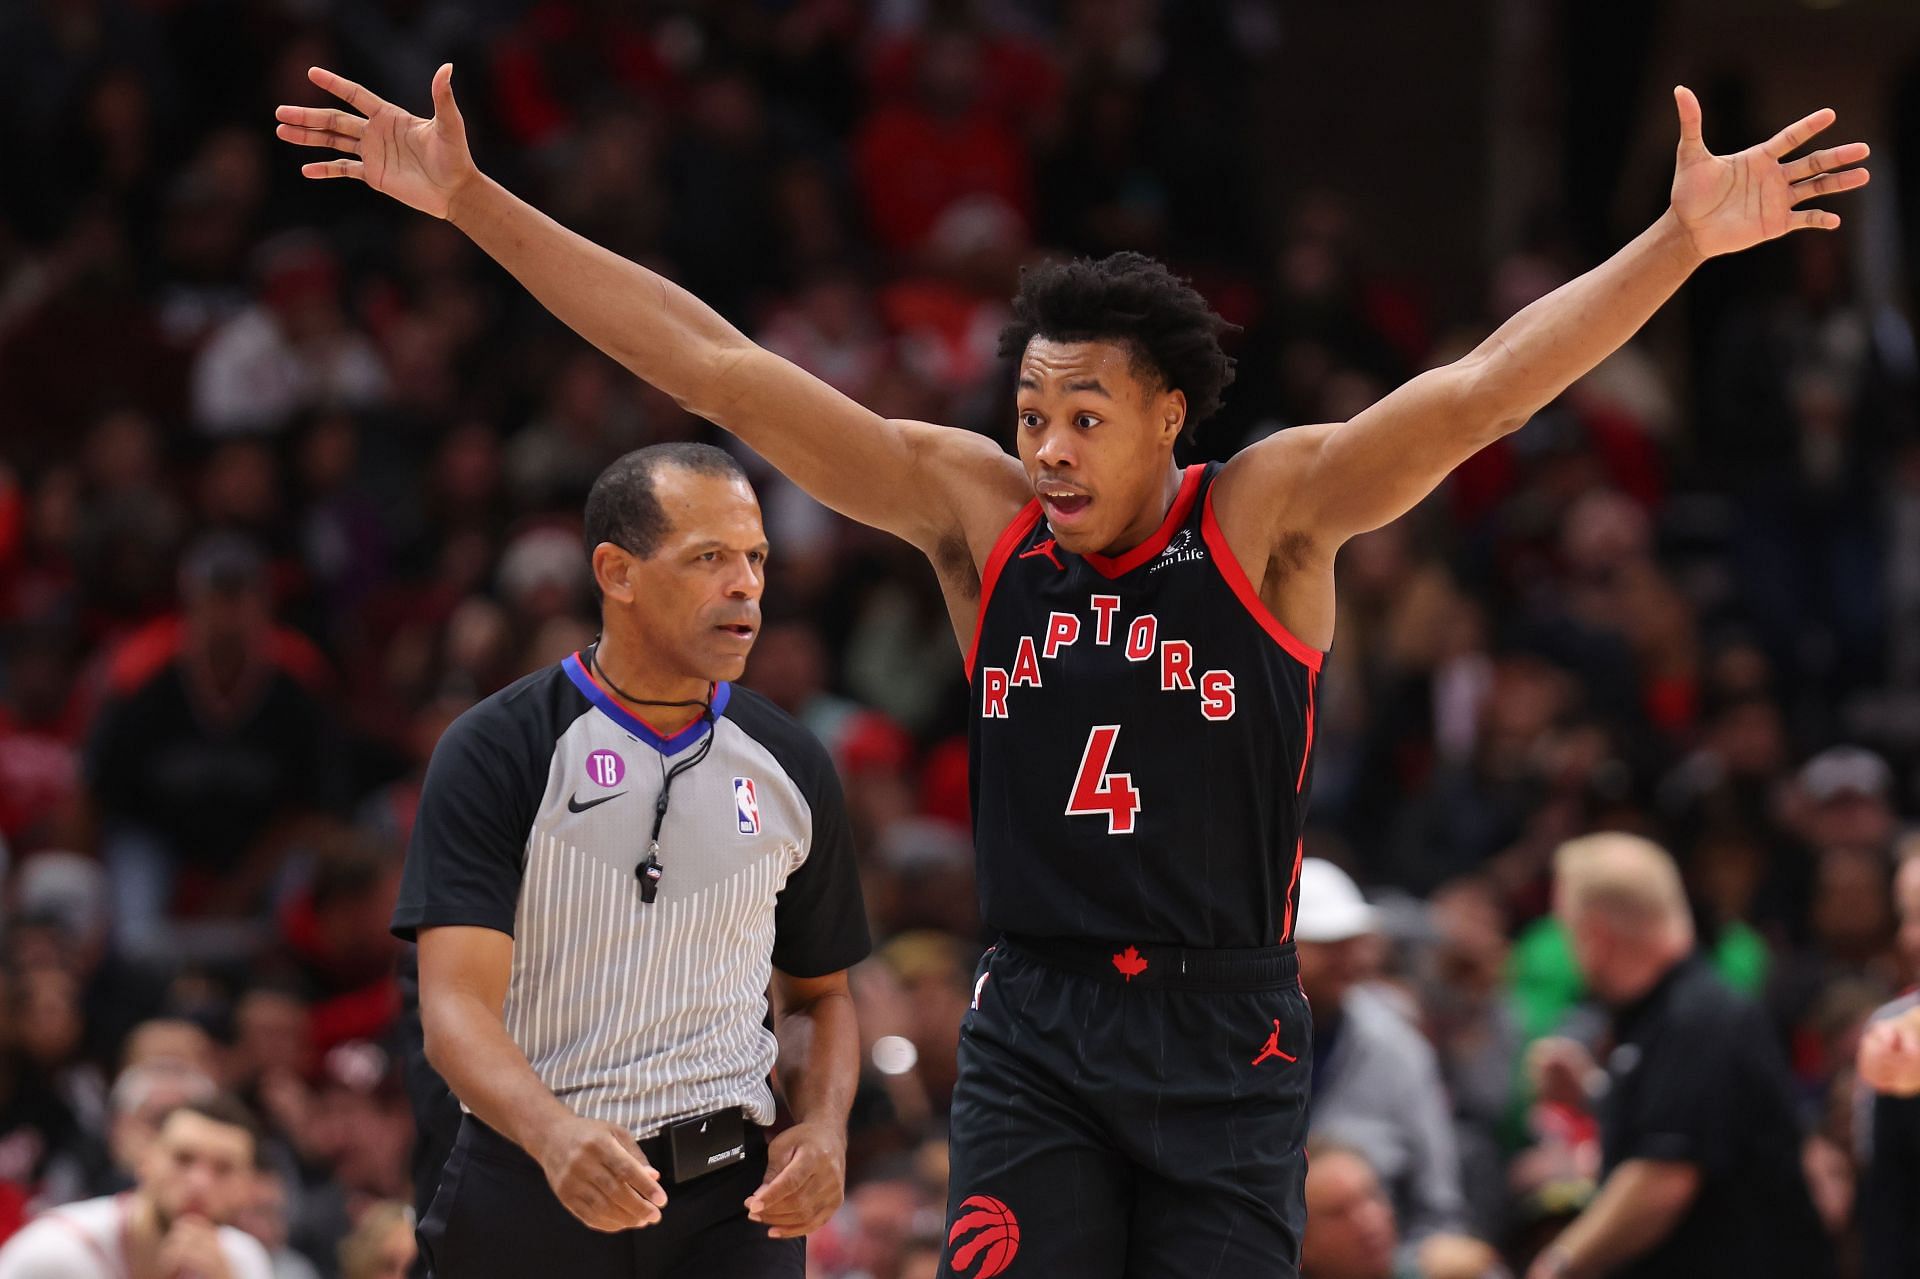 The NBA's reigning Rookie of the Year winner is questionable tonight for the Toronto Raptors.